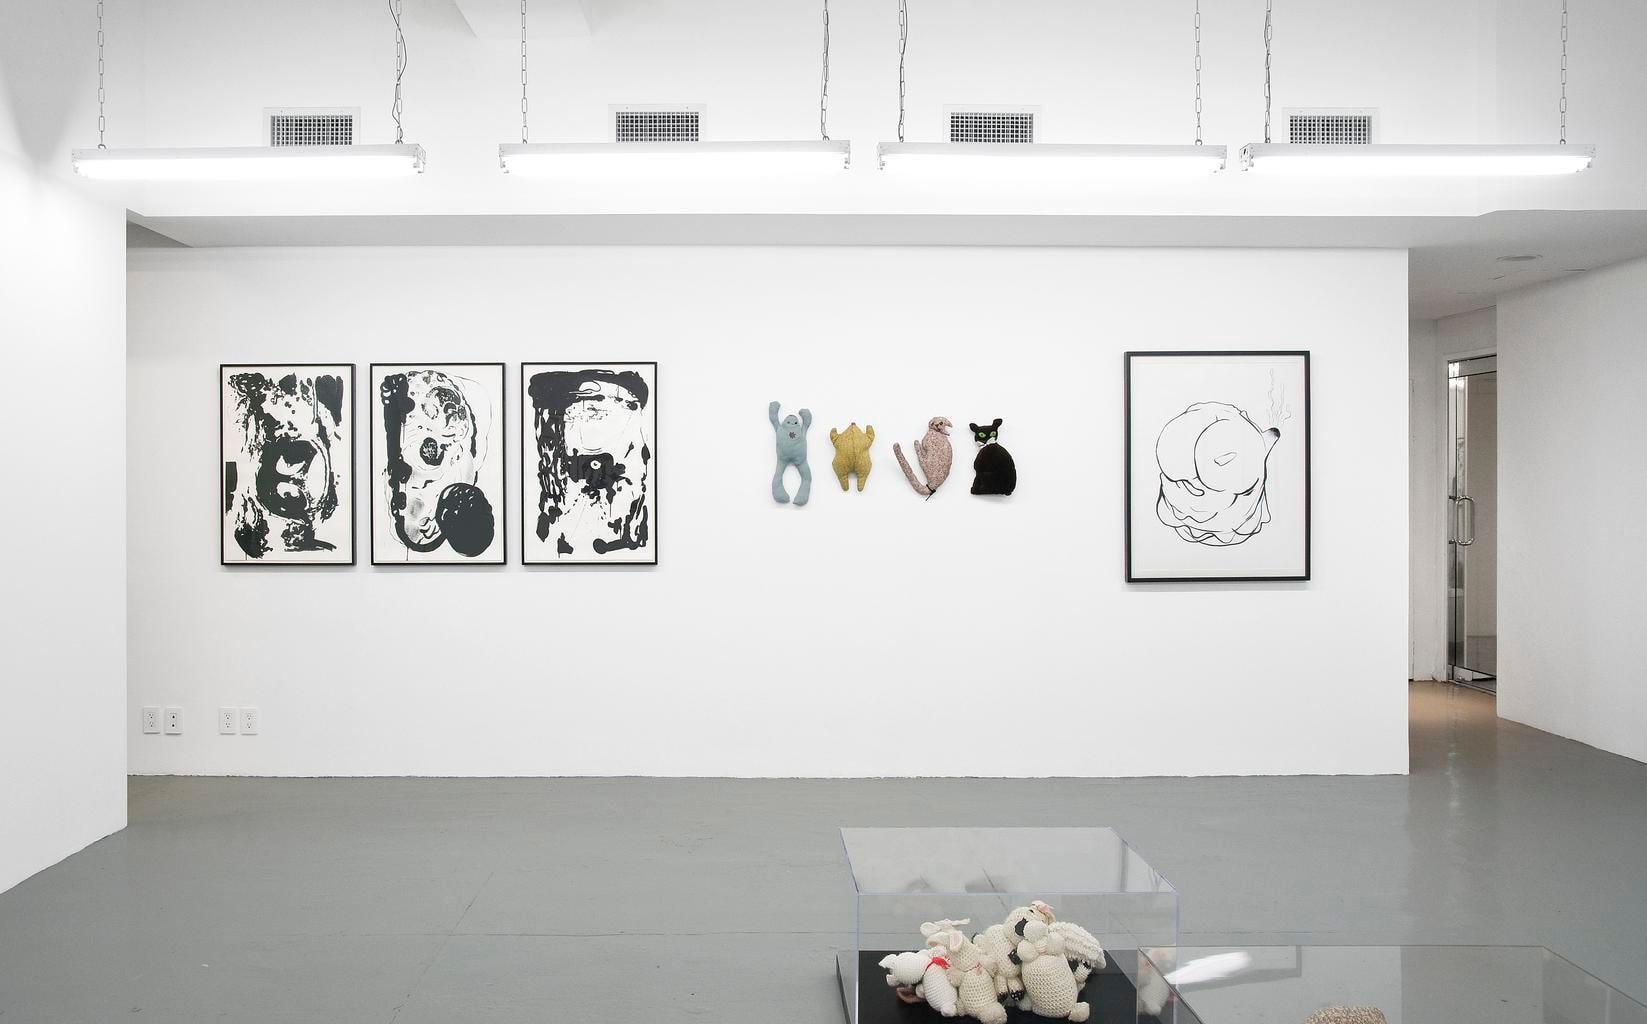  Installation view,&nbsp;Mike Kelly, Selected Works 1990-1995, Marc Jancou, New York, October 3 - November 9, 2013.